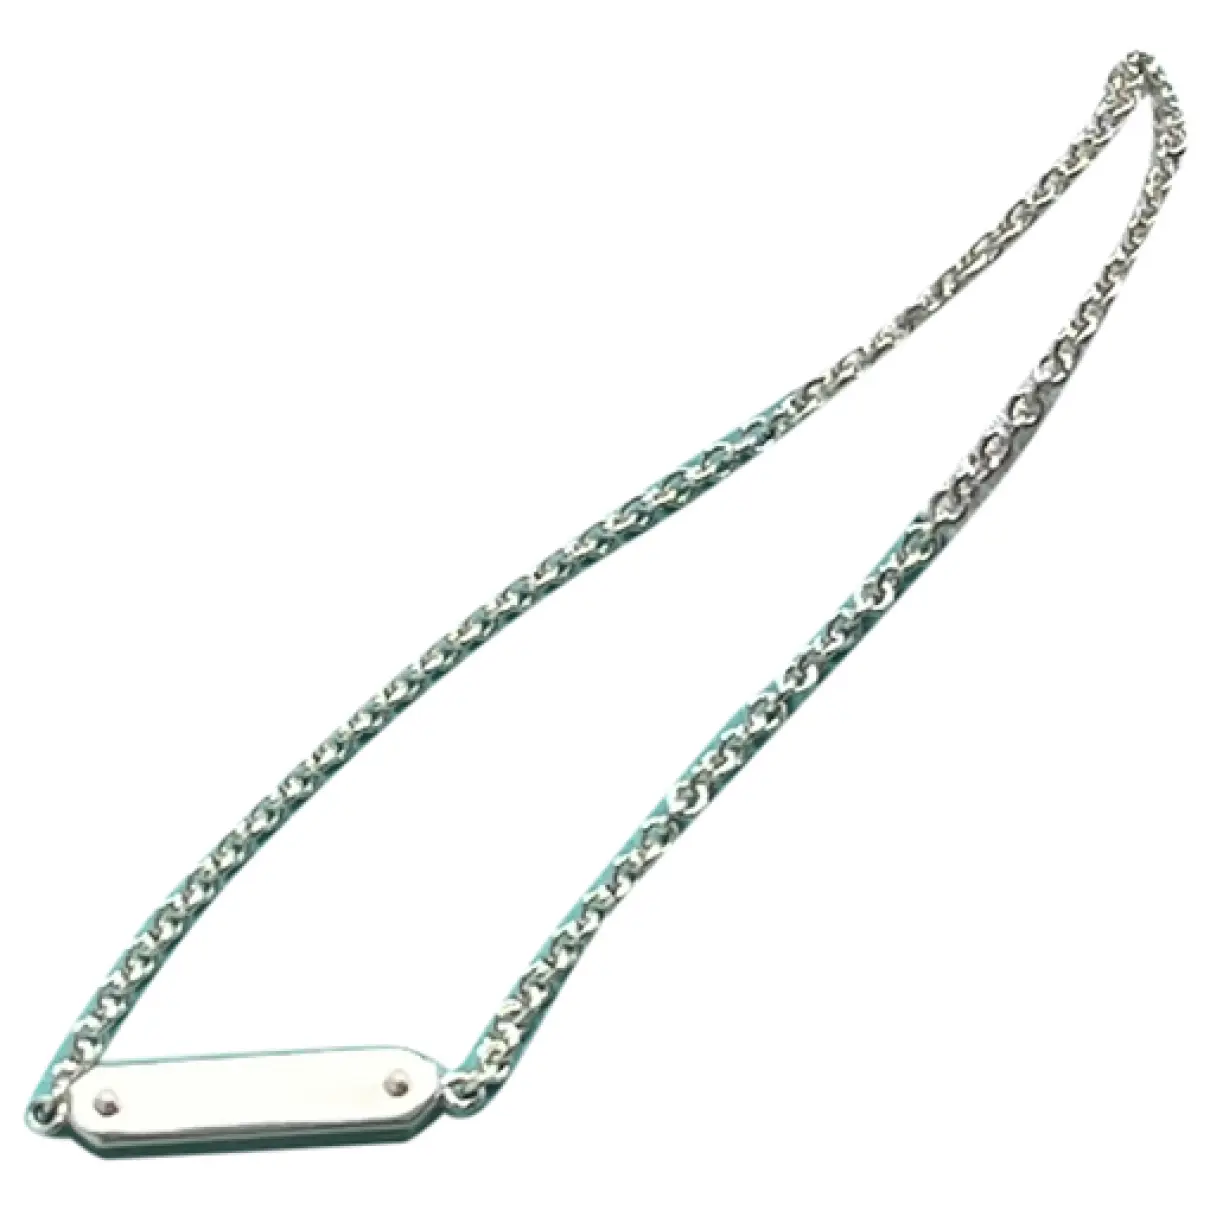 Return to Tiffany silver necklace